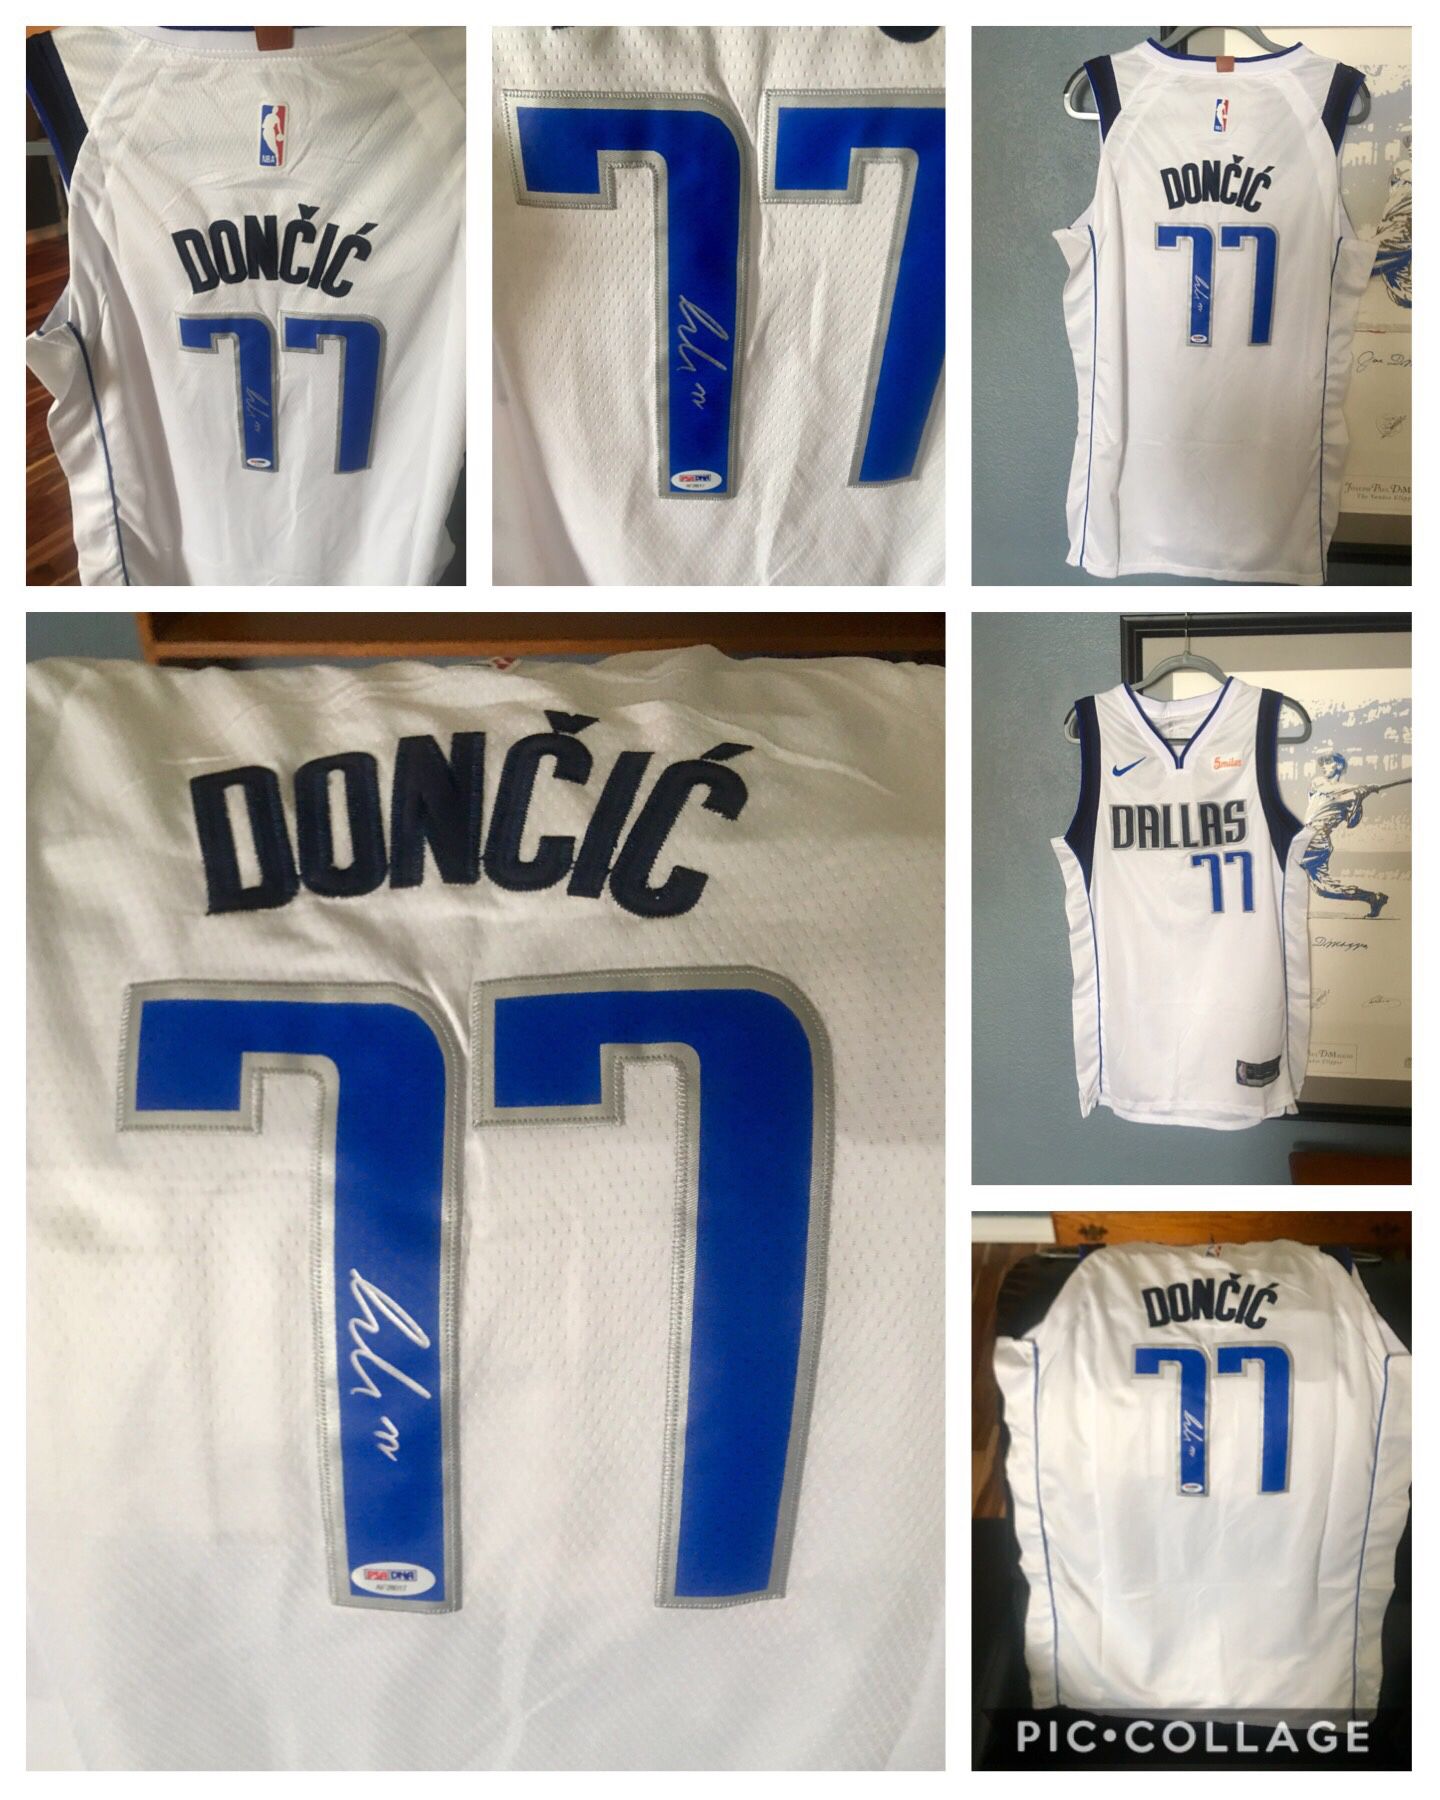 Luka Doncic 2018-19 Rookie of the year Autographed Swingman Jersey (PSA-DNA)